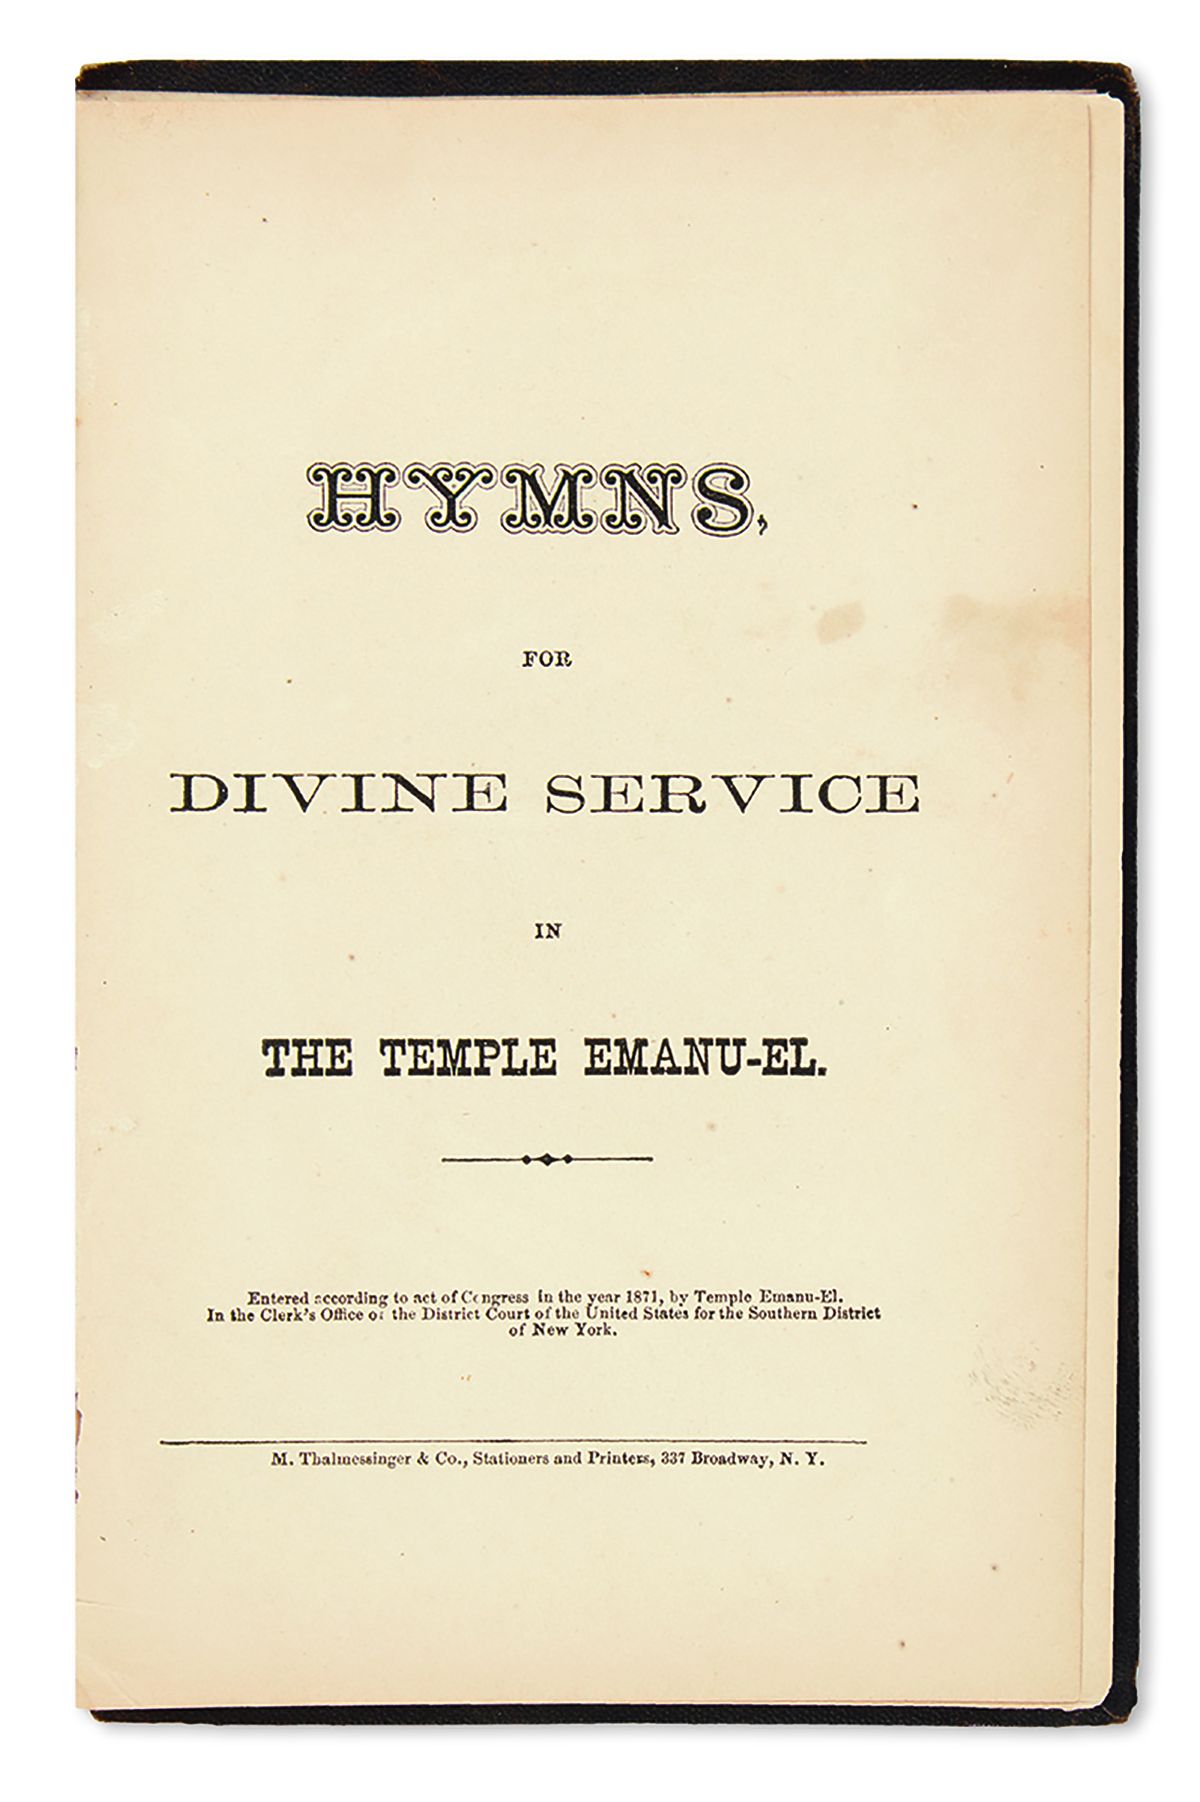 Hymns for Divine Service in the Temple Emanu-El. 